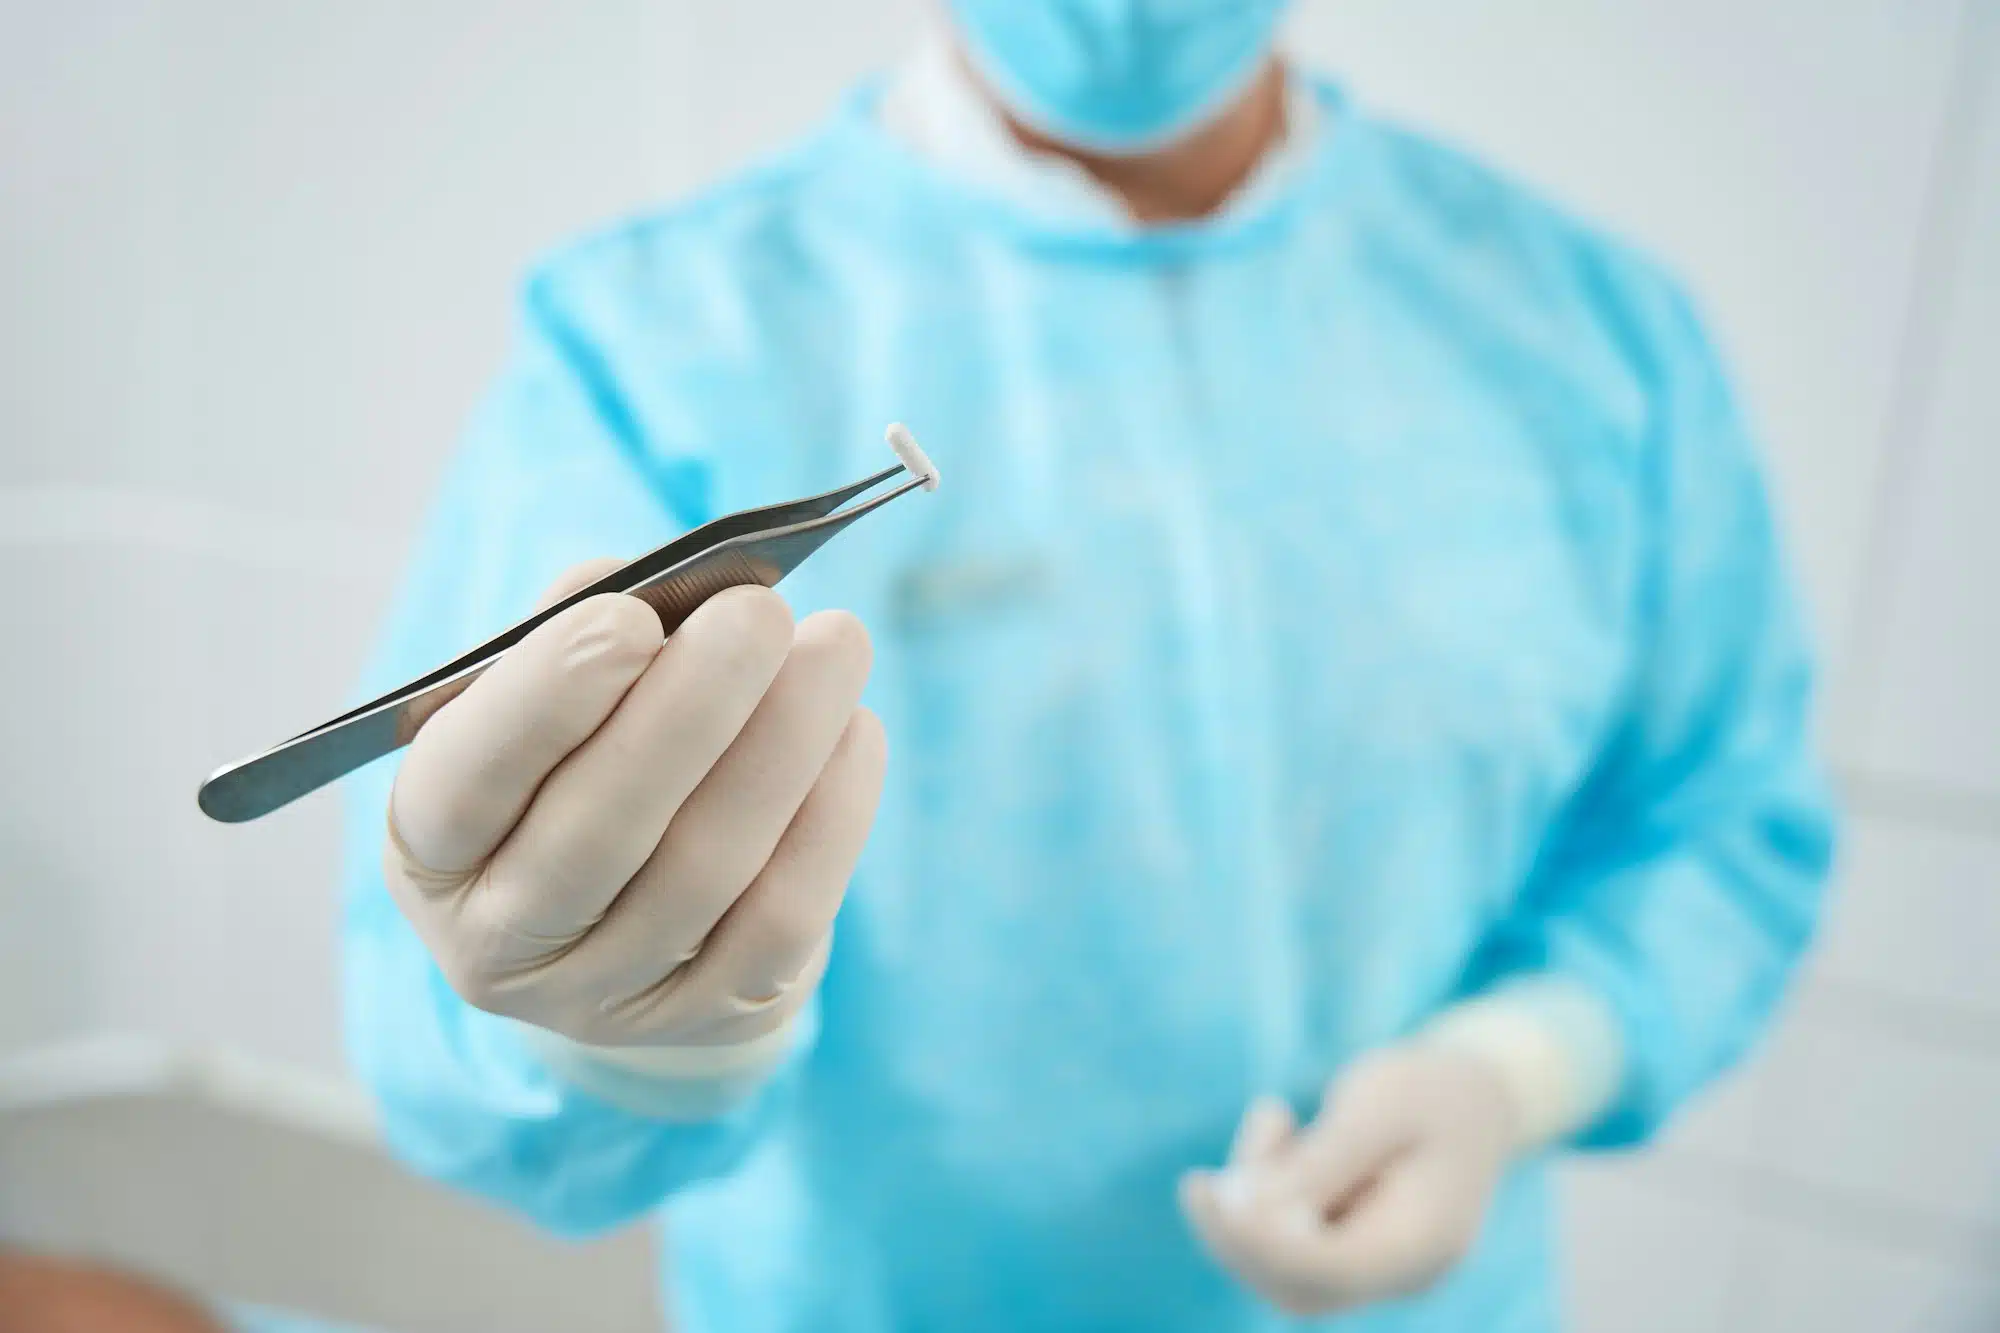 Cropped photo of doctor holds in his hand tweezers and a pellet